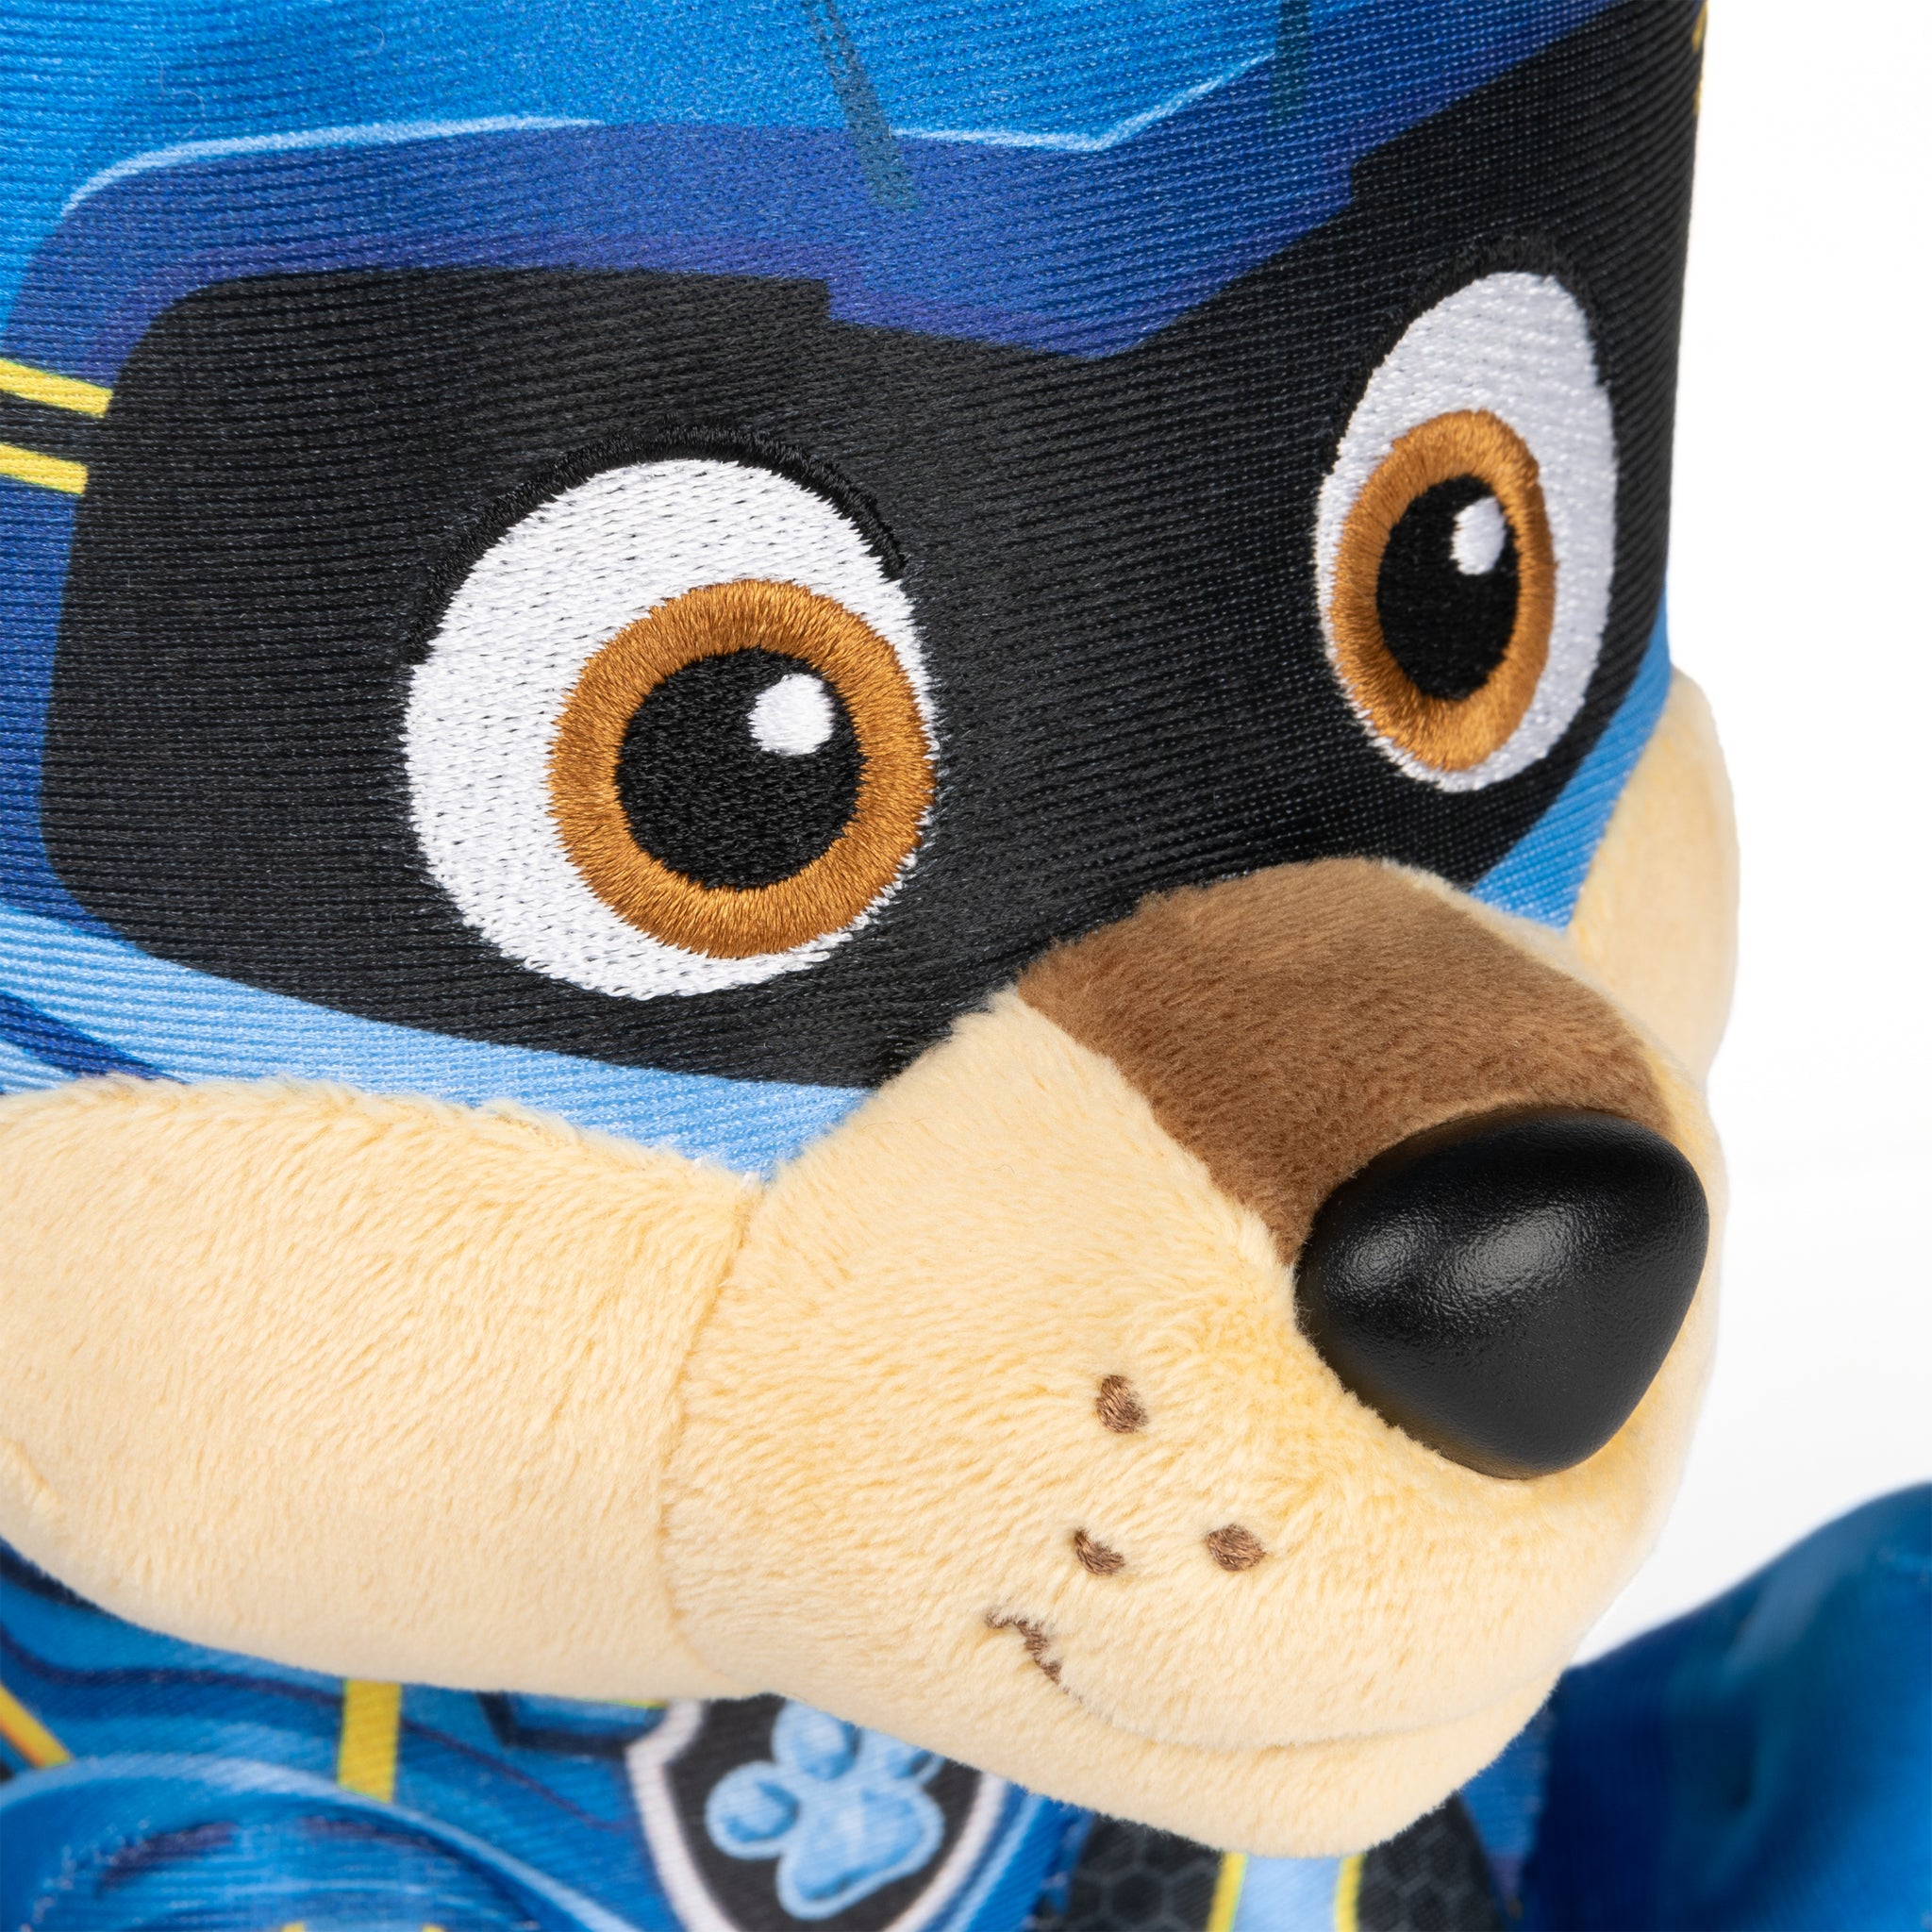 GUND PAW Patrol: The Movie Chase Plush Toy, Premium Stuffed Animal for Ages  1 and Up, 6”